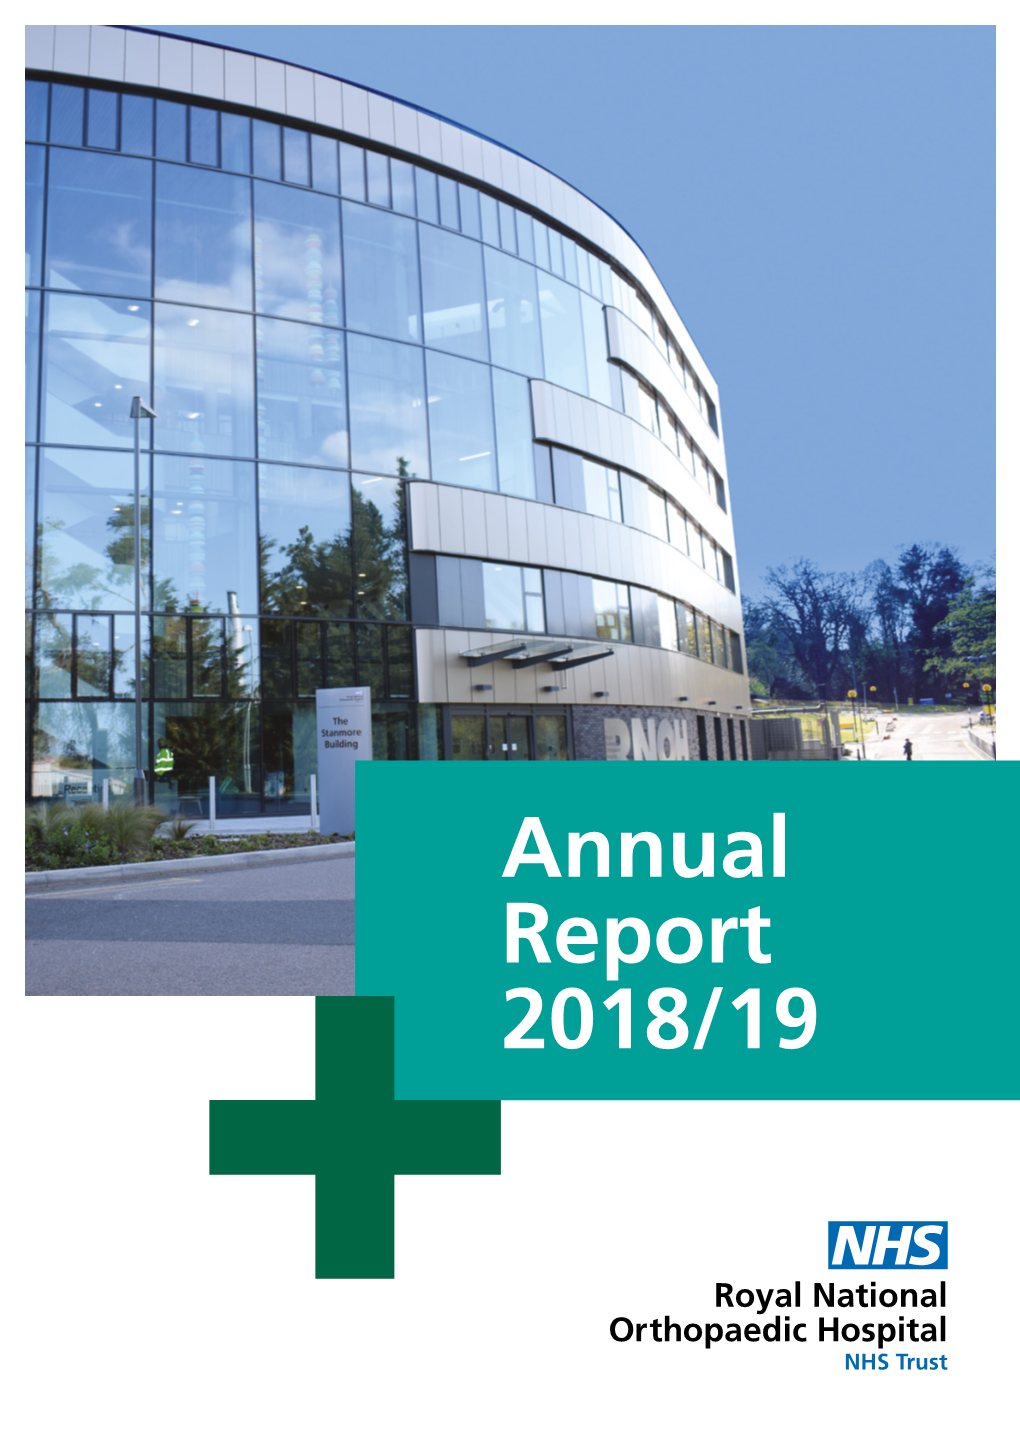 Annual Report 2018/19 the Royal National Orthopaedic Hospital NHS Trust Annual Report 2018/19